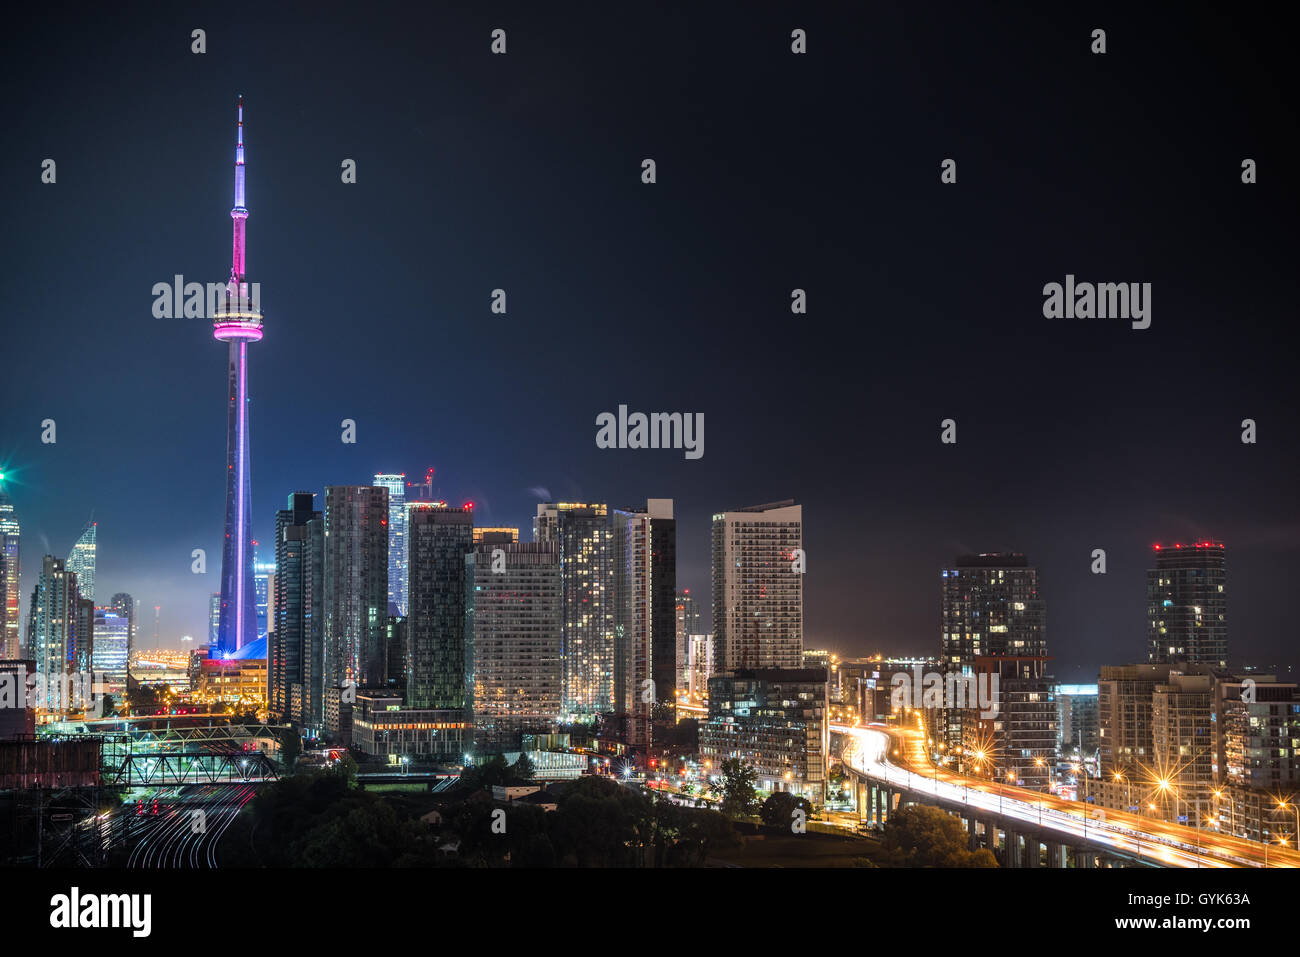 Rooftop panoramic of city Torontoskyline.  Buildings & office towers on hot, humid August night Capitol city of Ontario, Canada. Stock Photo